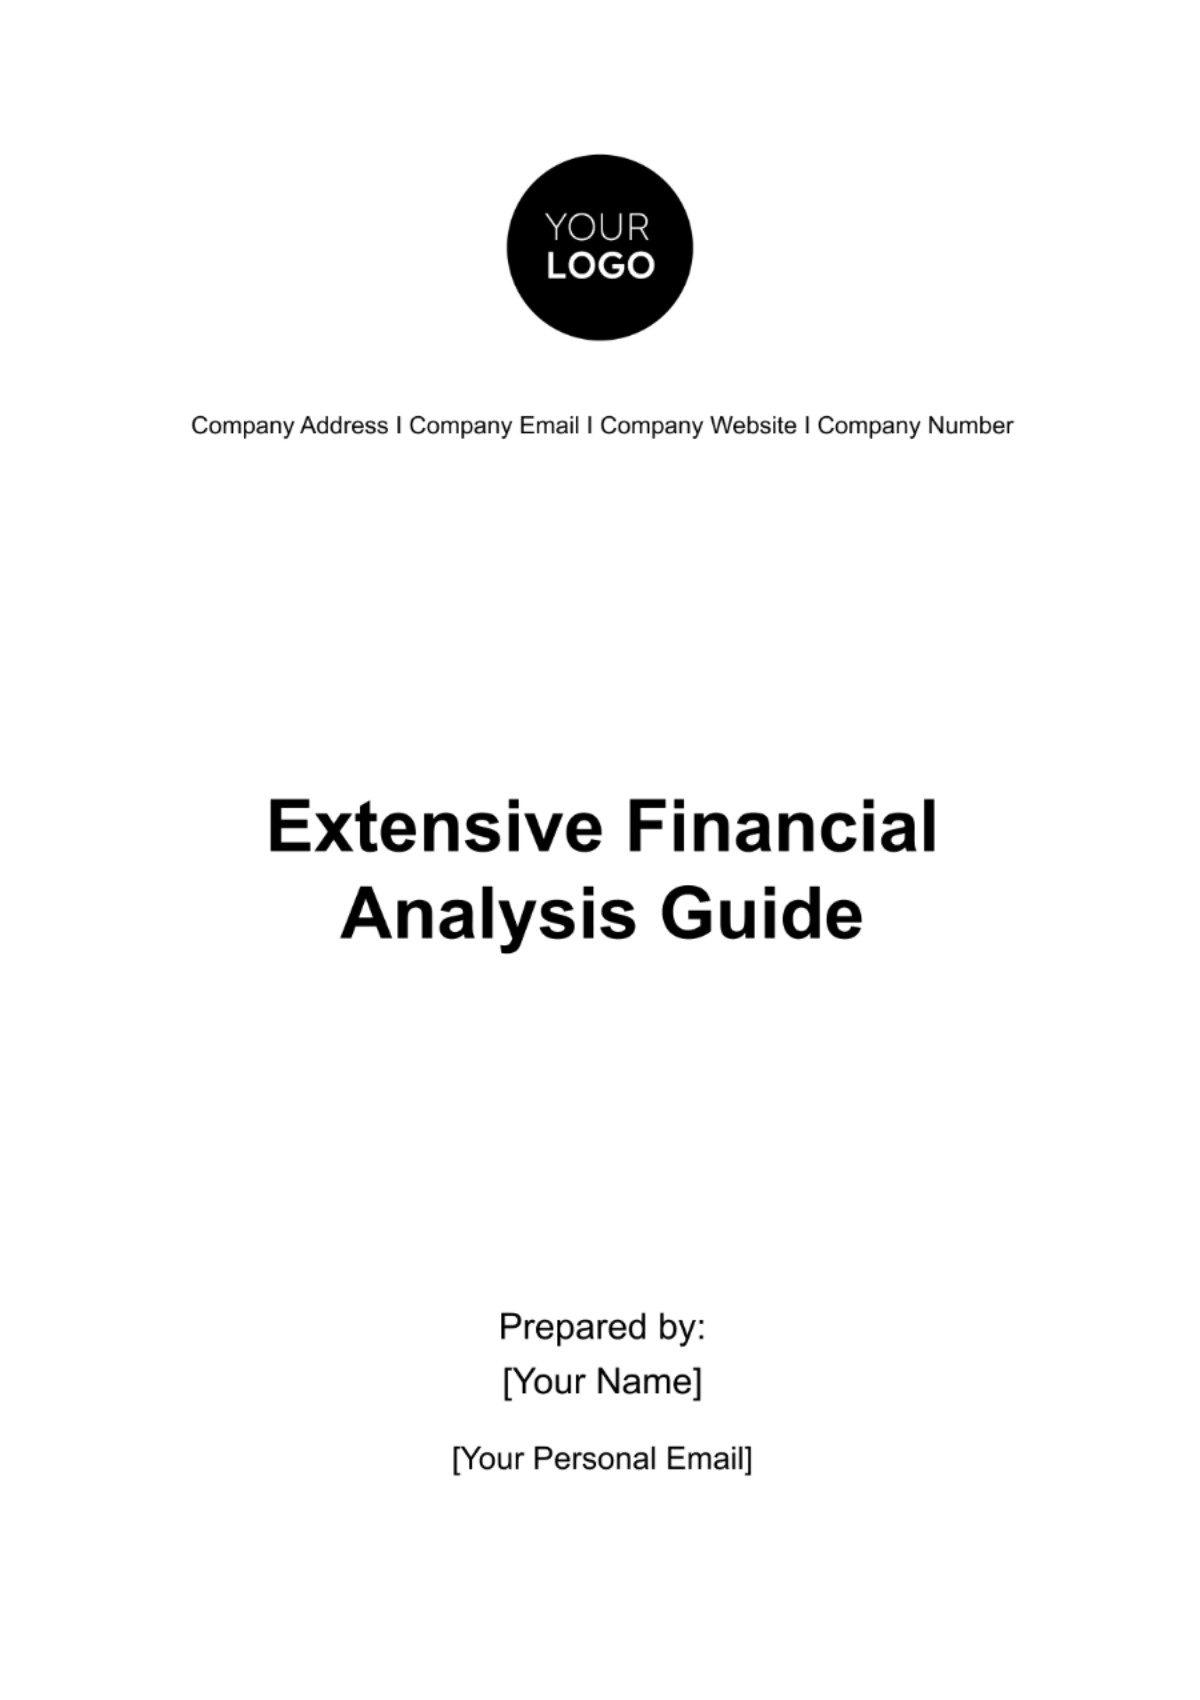 Extensive Financial Analysis Guide Template